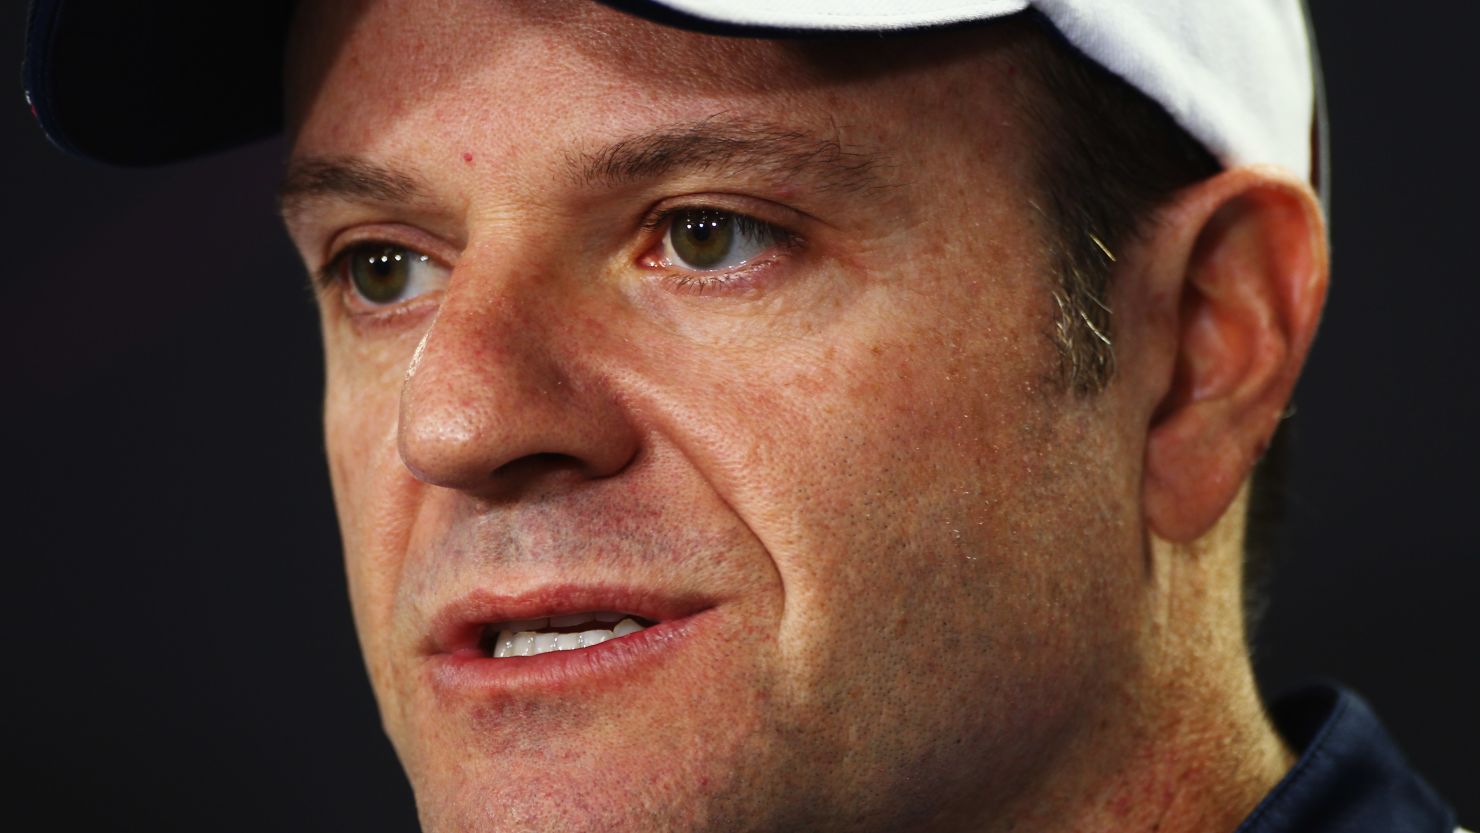 Rubens Barrichello has turned to the IndyCar series after a record-breaking career in Formula One.